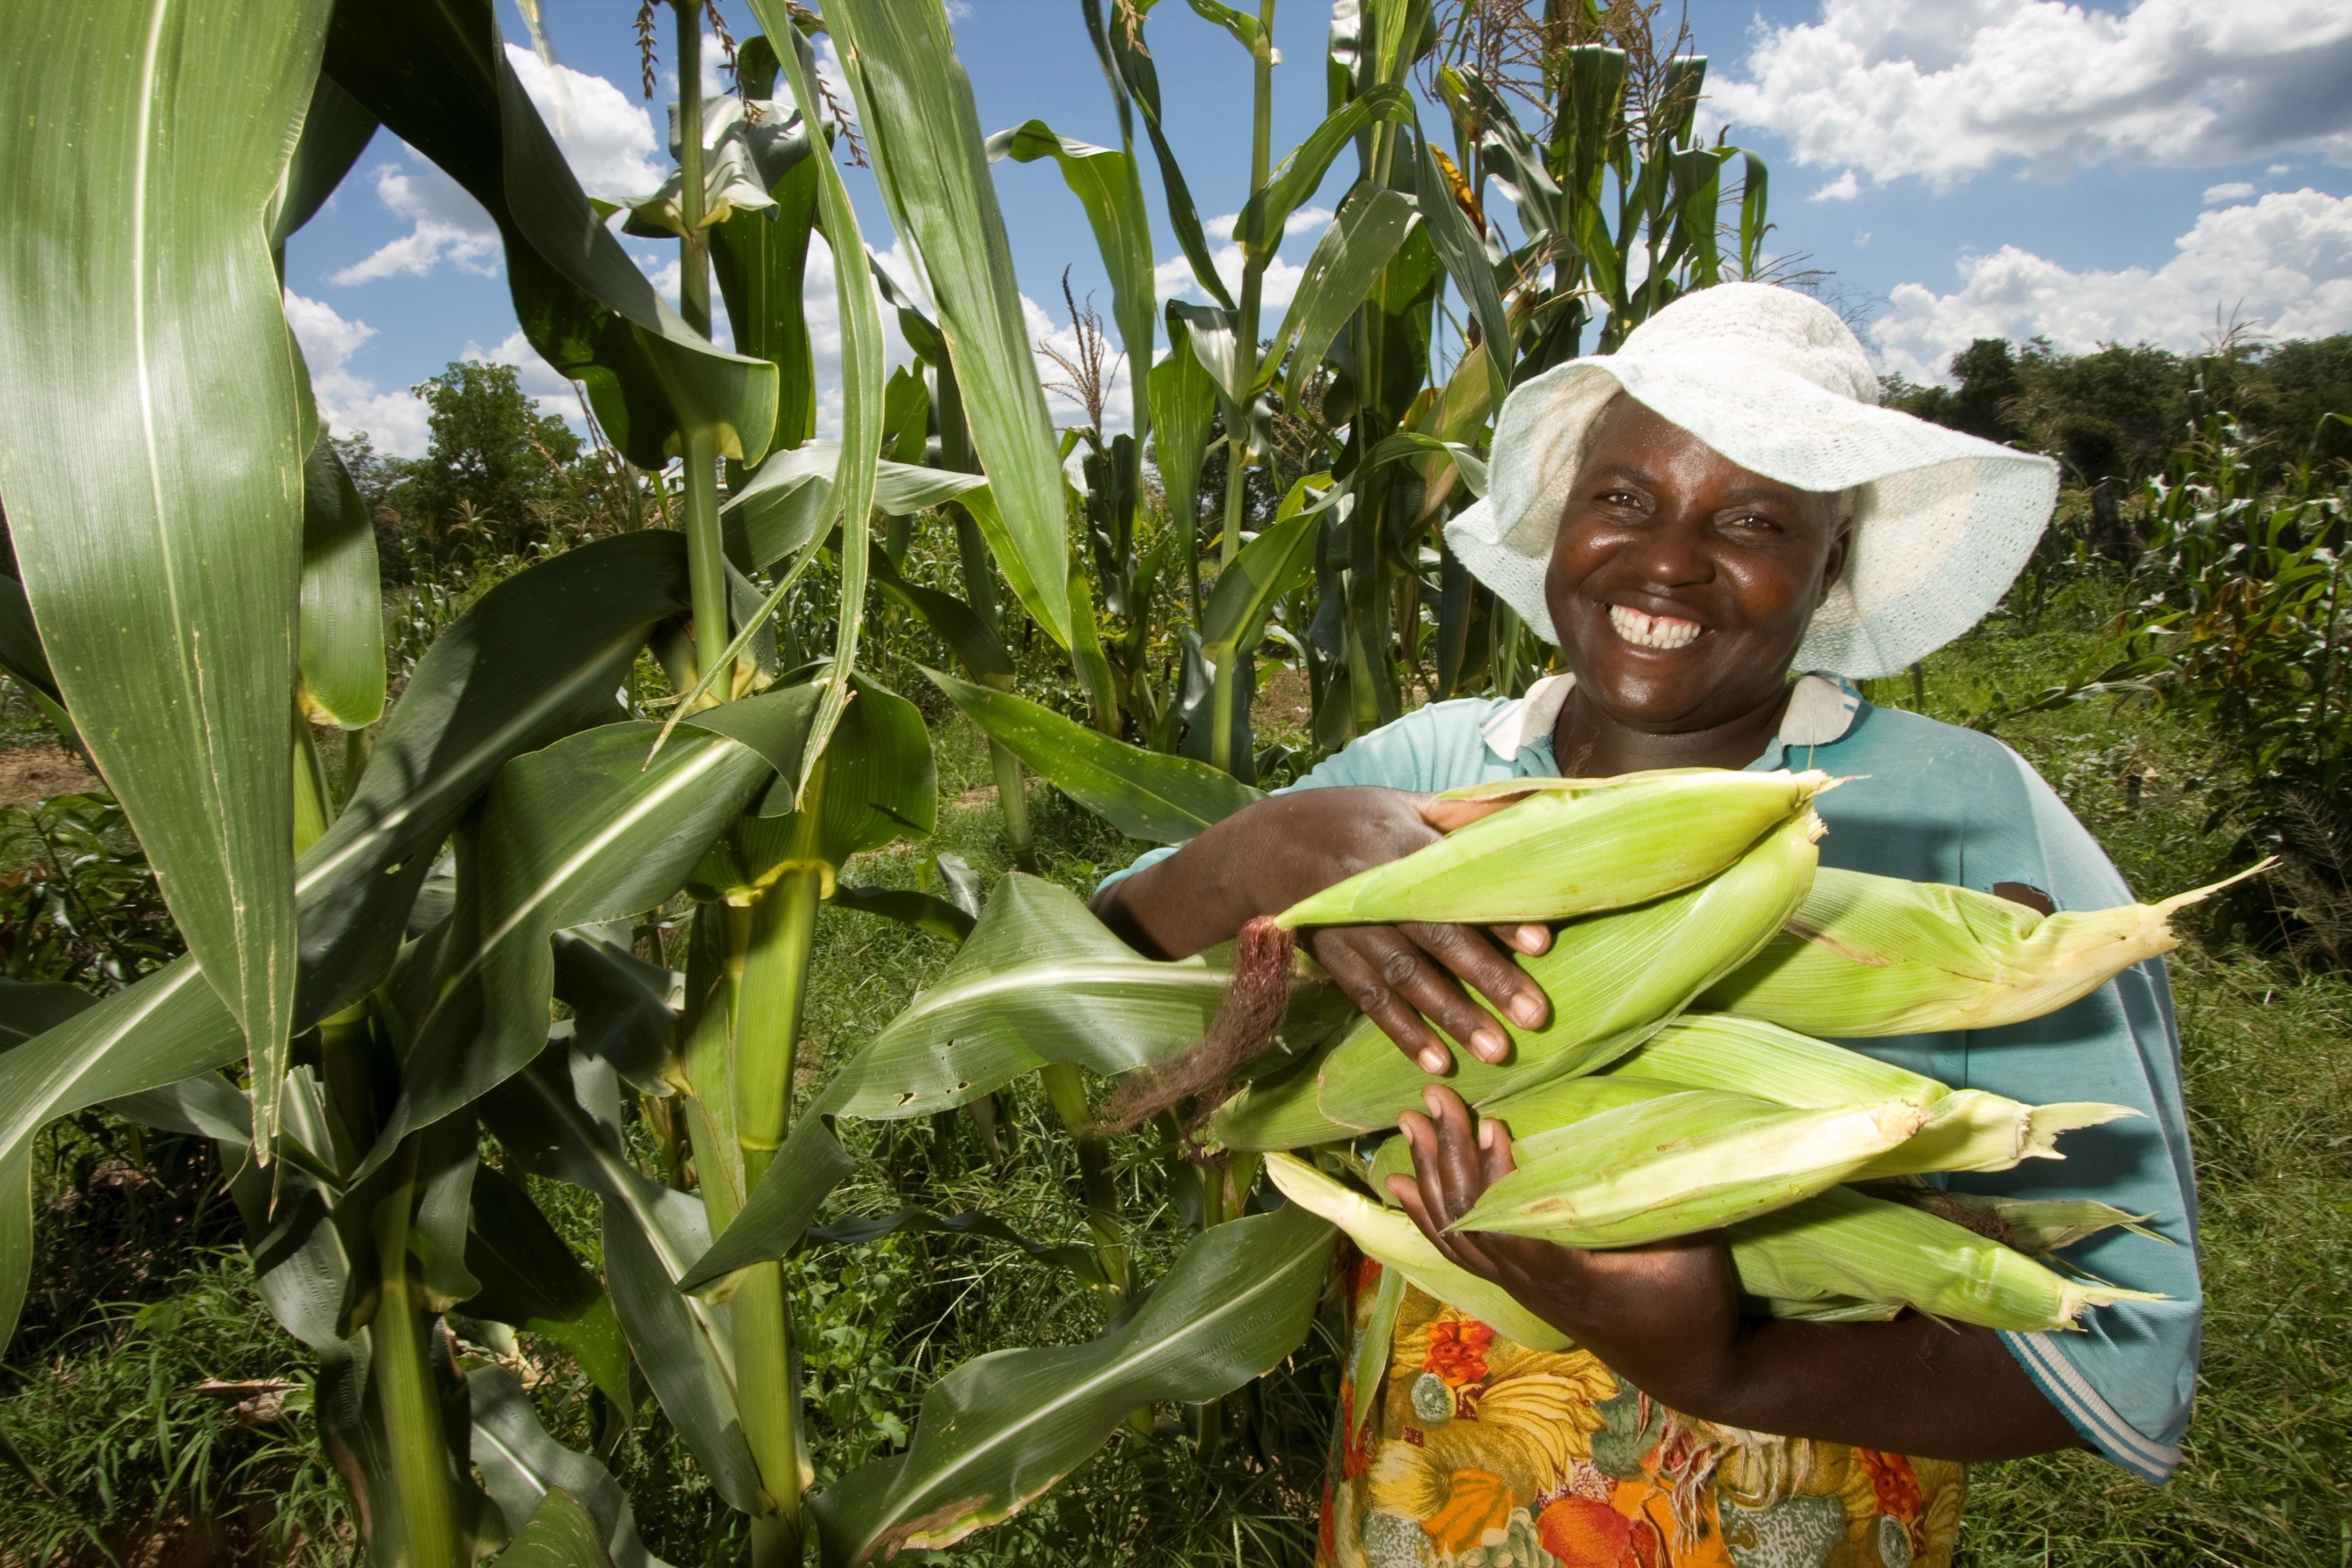 Maize is one of the staple foods eaten in Zimbabwe